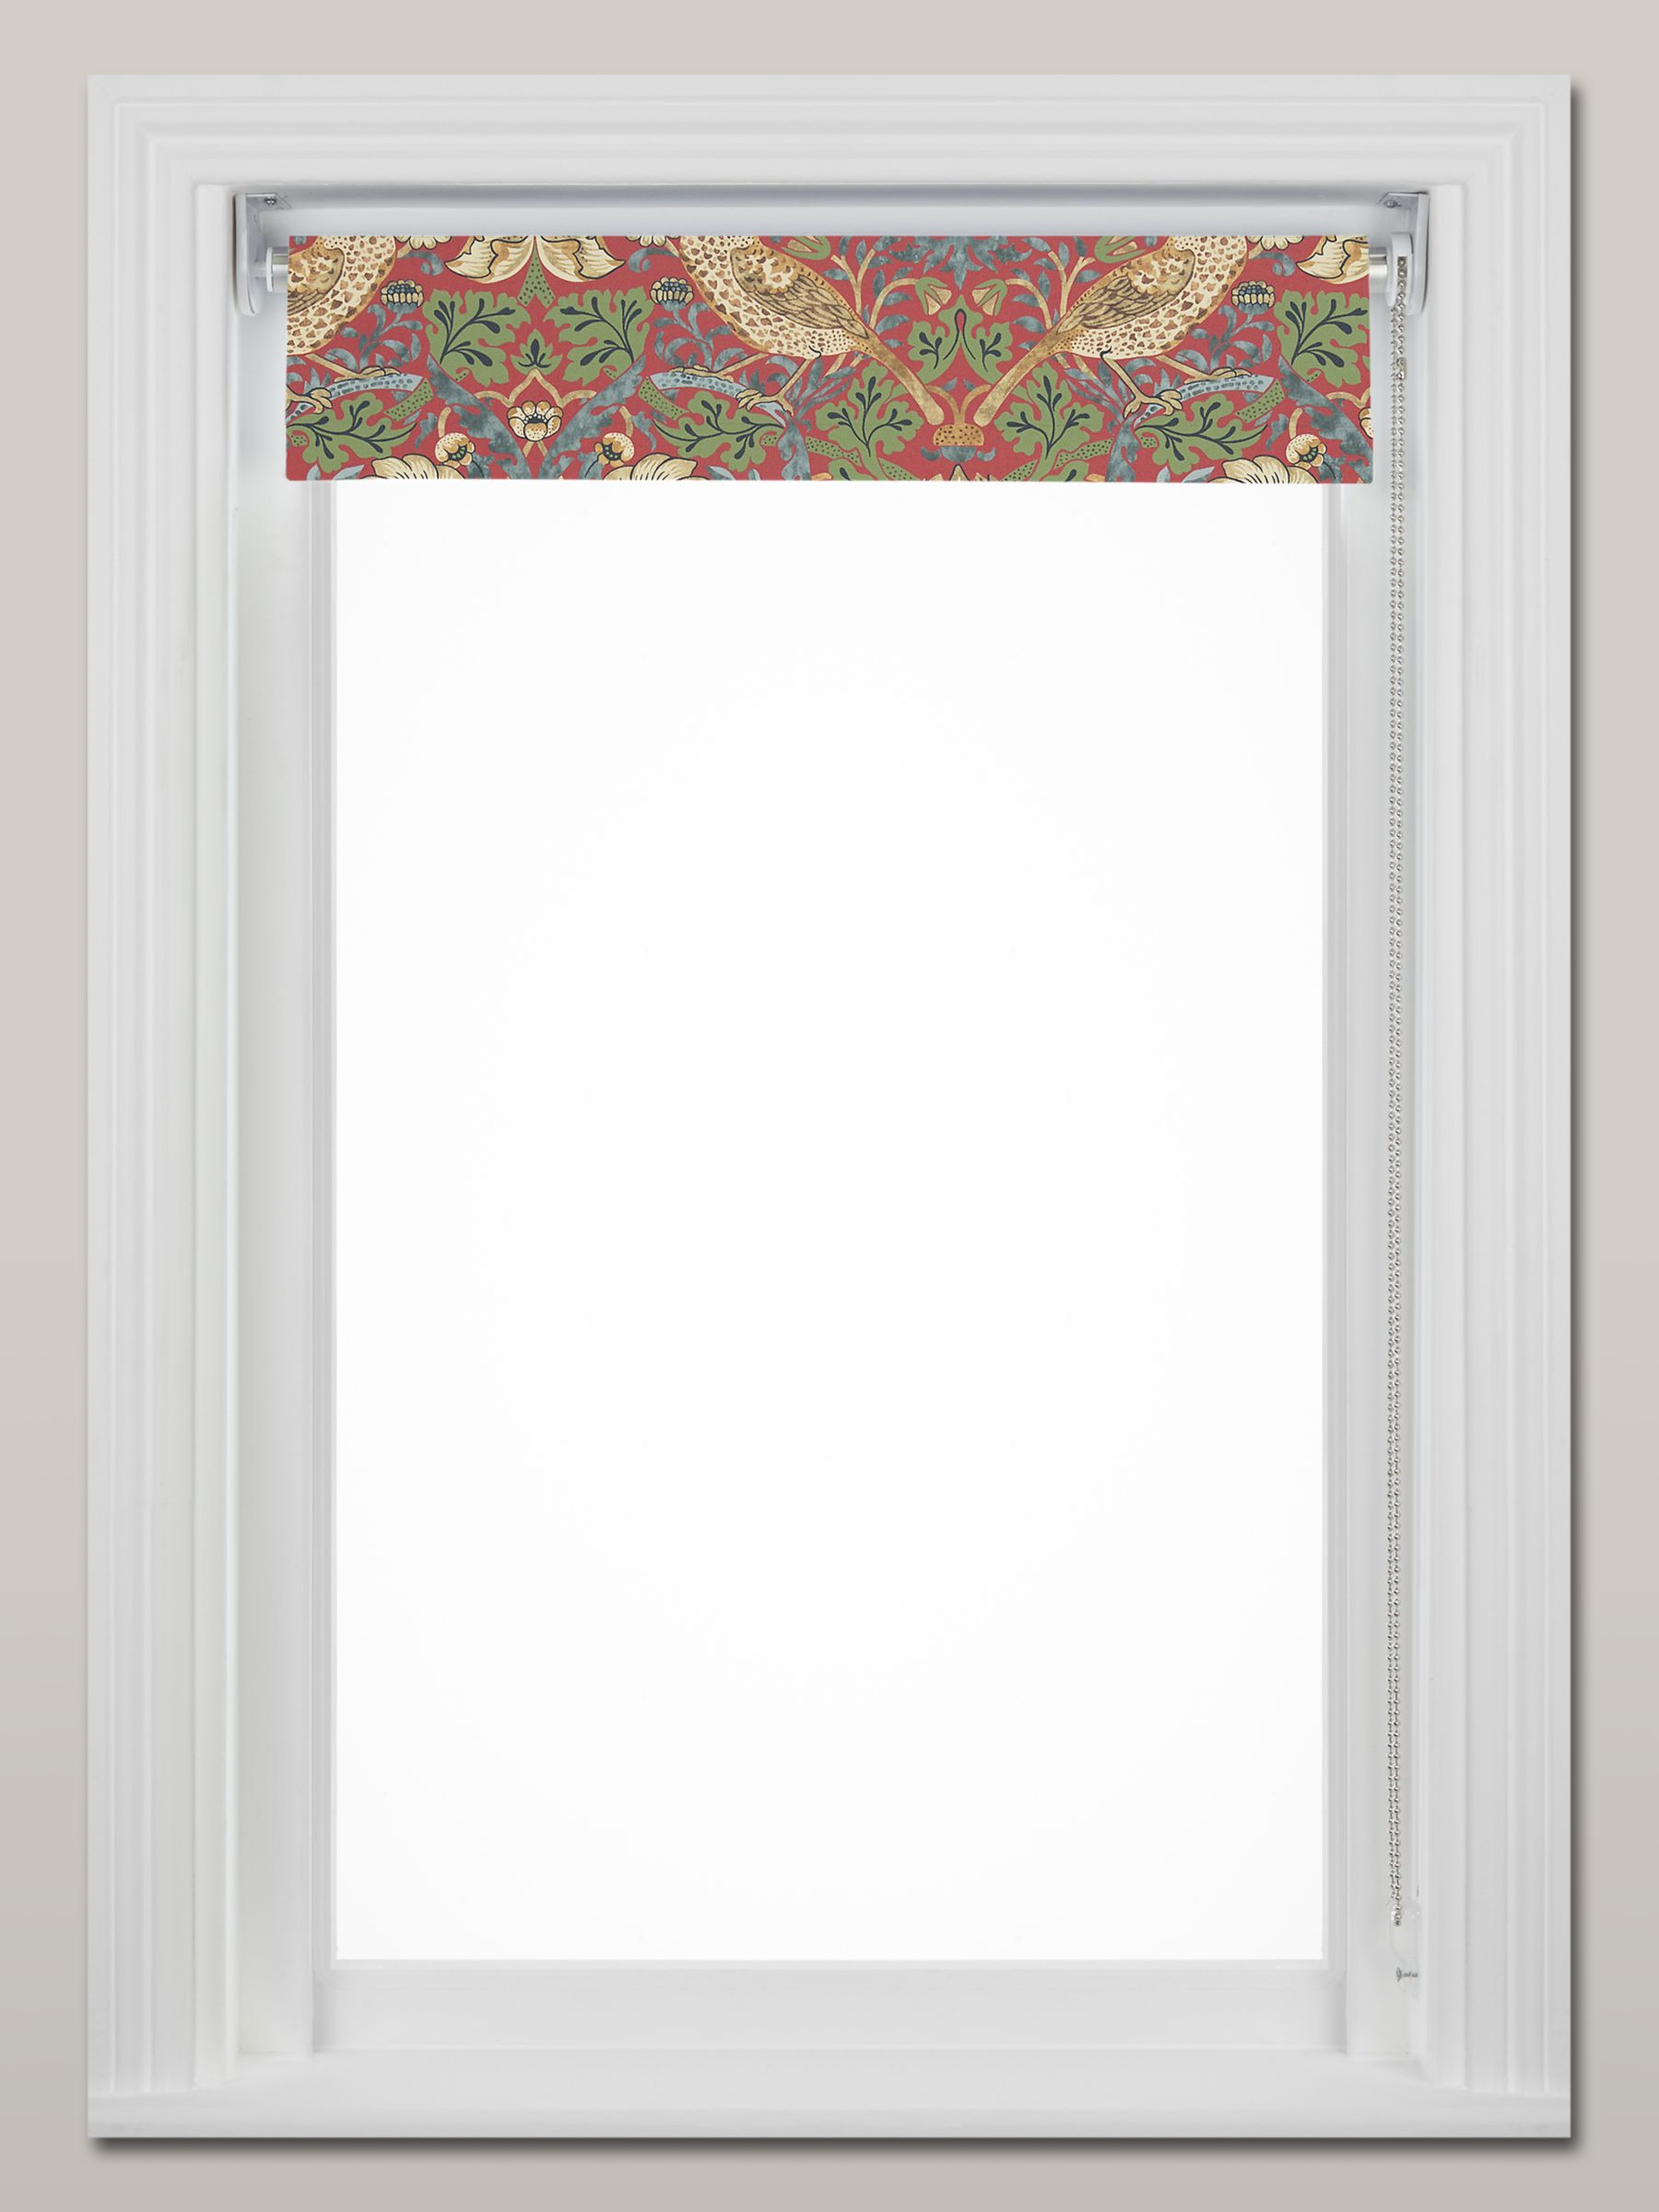 Morris & Co. Strawberry Thief Made to Measure Blackout Roller Blind, Crimson